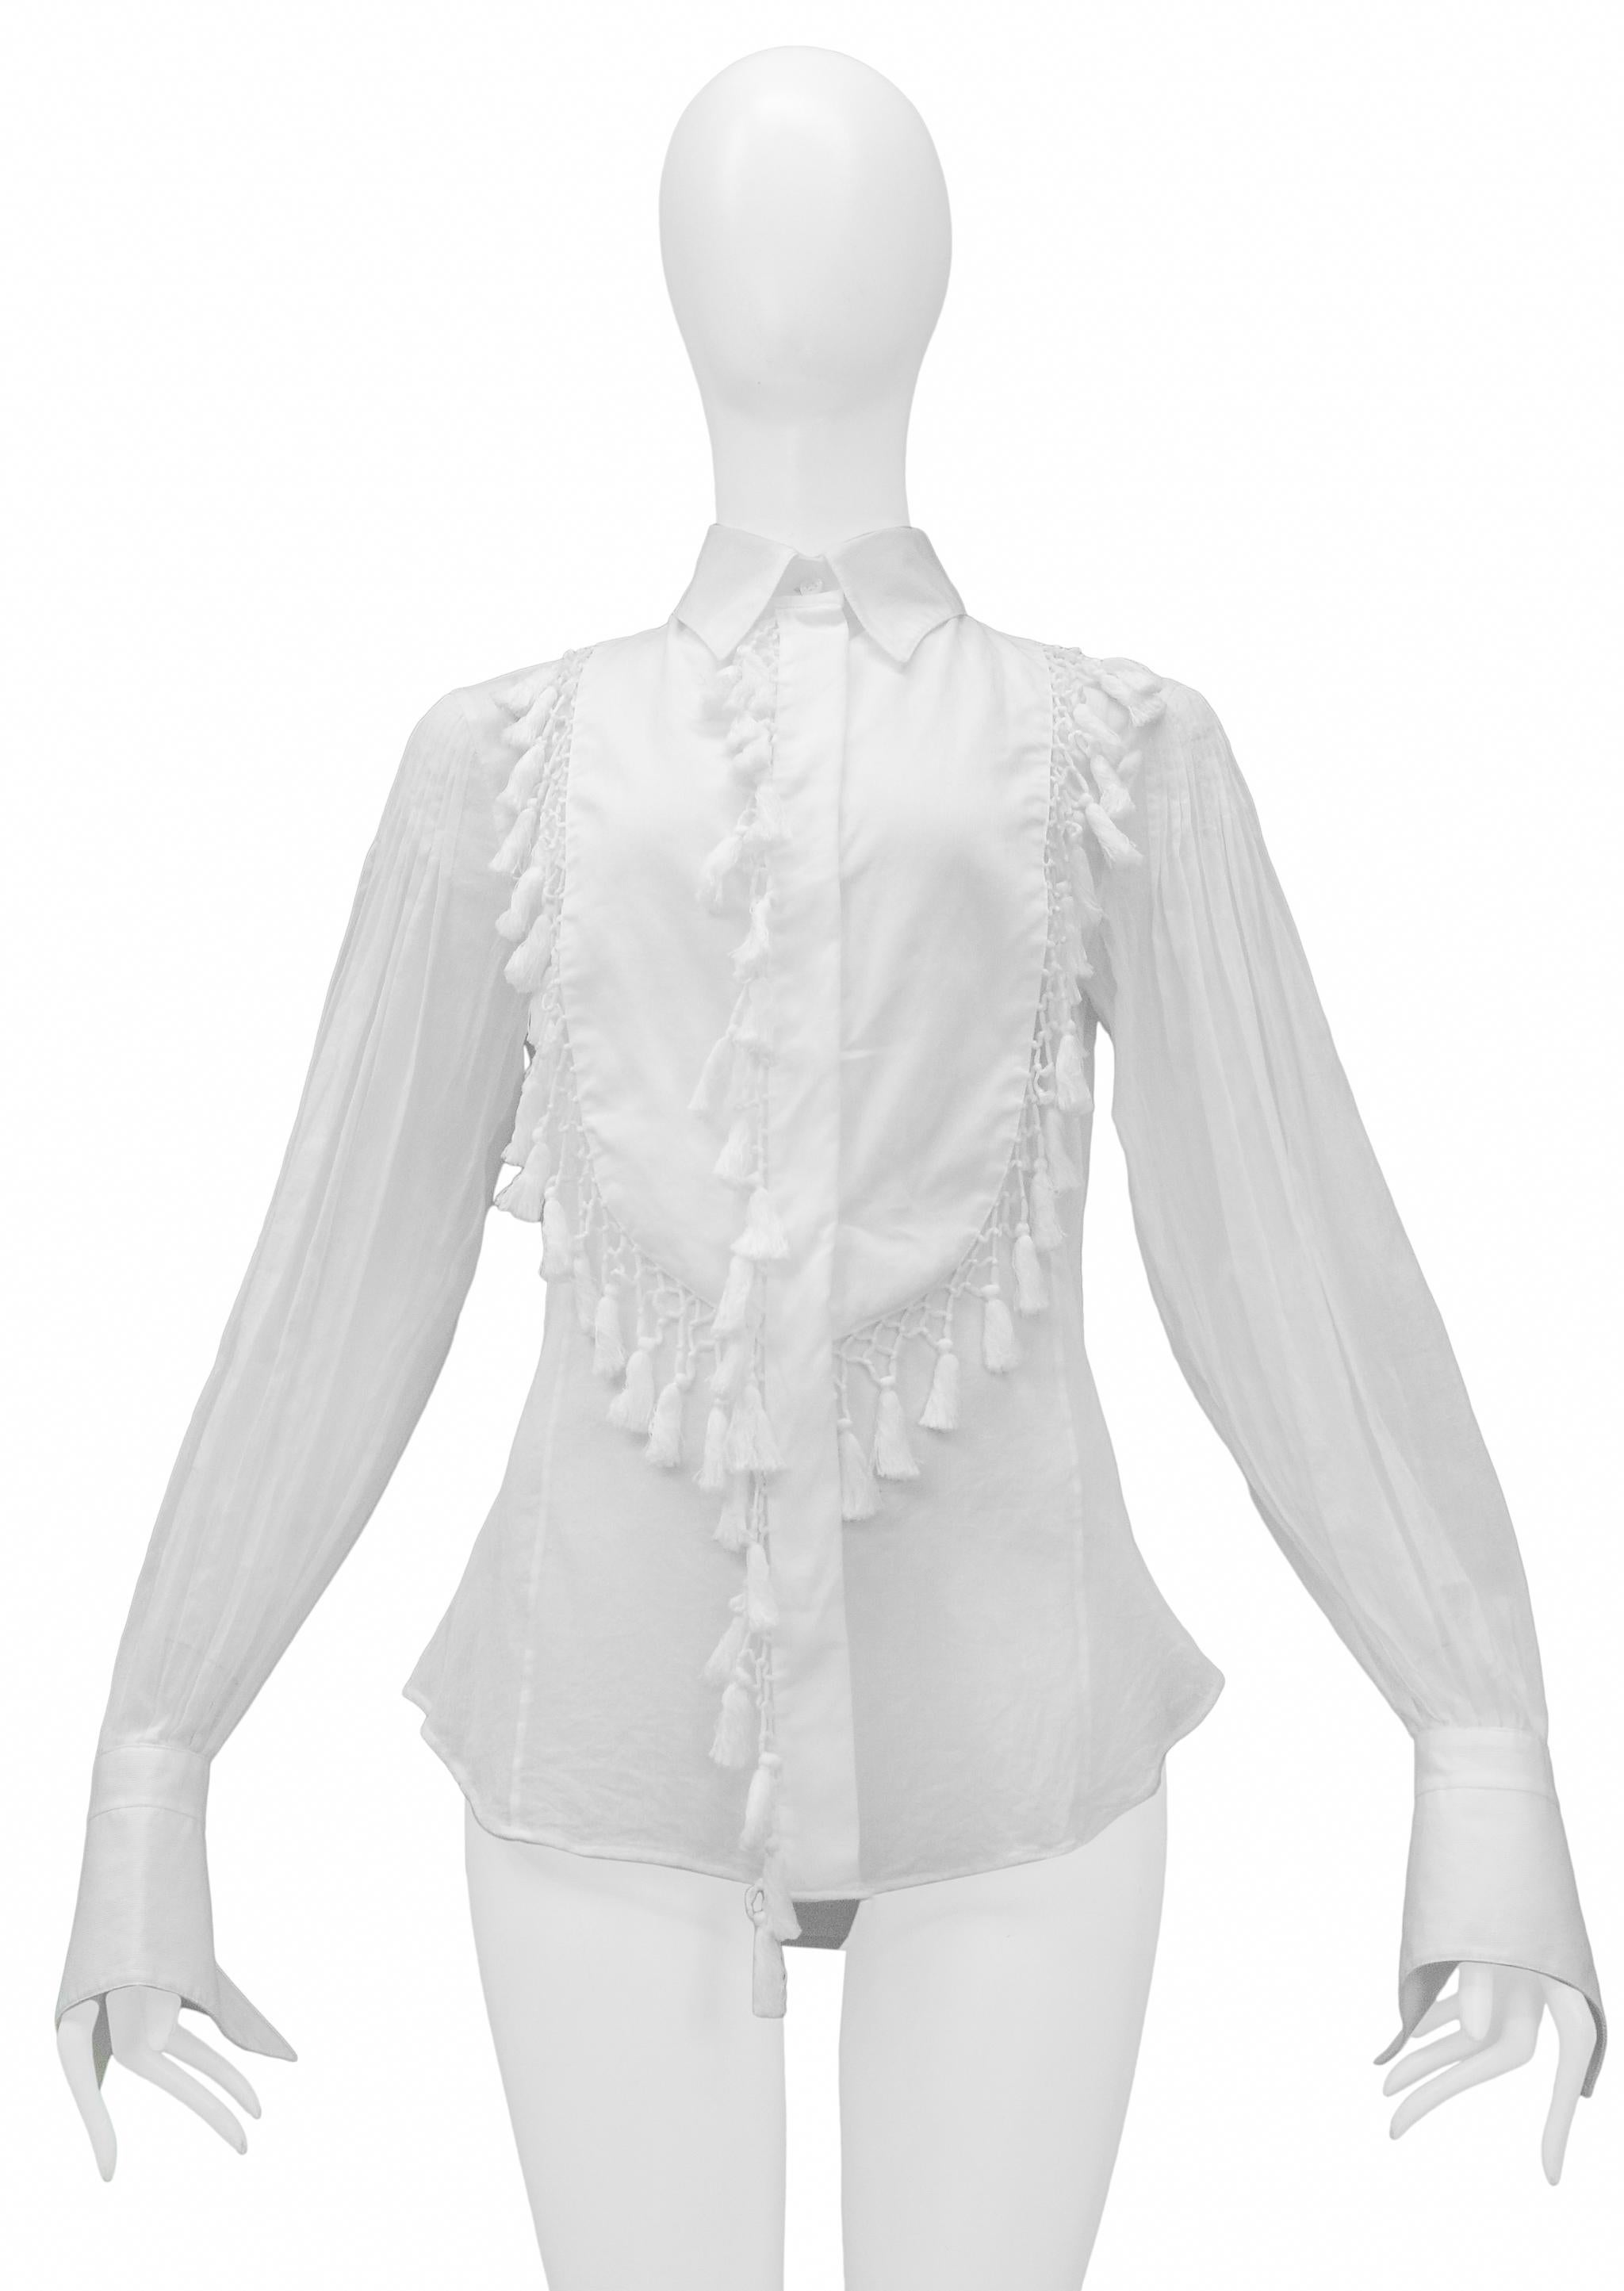 Resurrection Vintage is excited to offer a vintage Gianfranco Ferre white cotton shirt featuring decorative tassels, button front, folding collar, long sleeves, and large cuffs. 

Gianfranco Ferre
Size 40
Cotton    
Excellent Vintage Condition